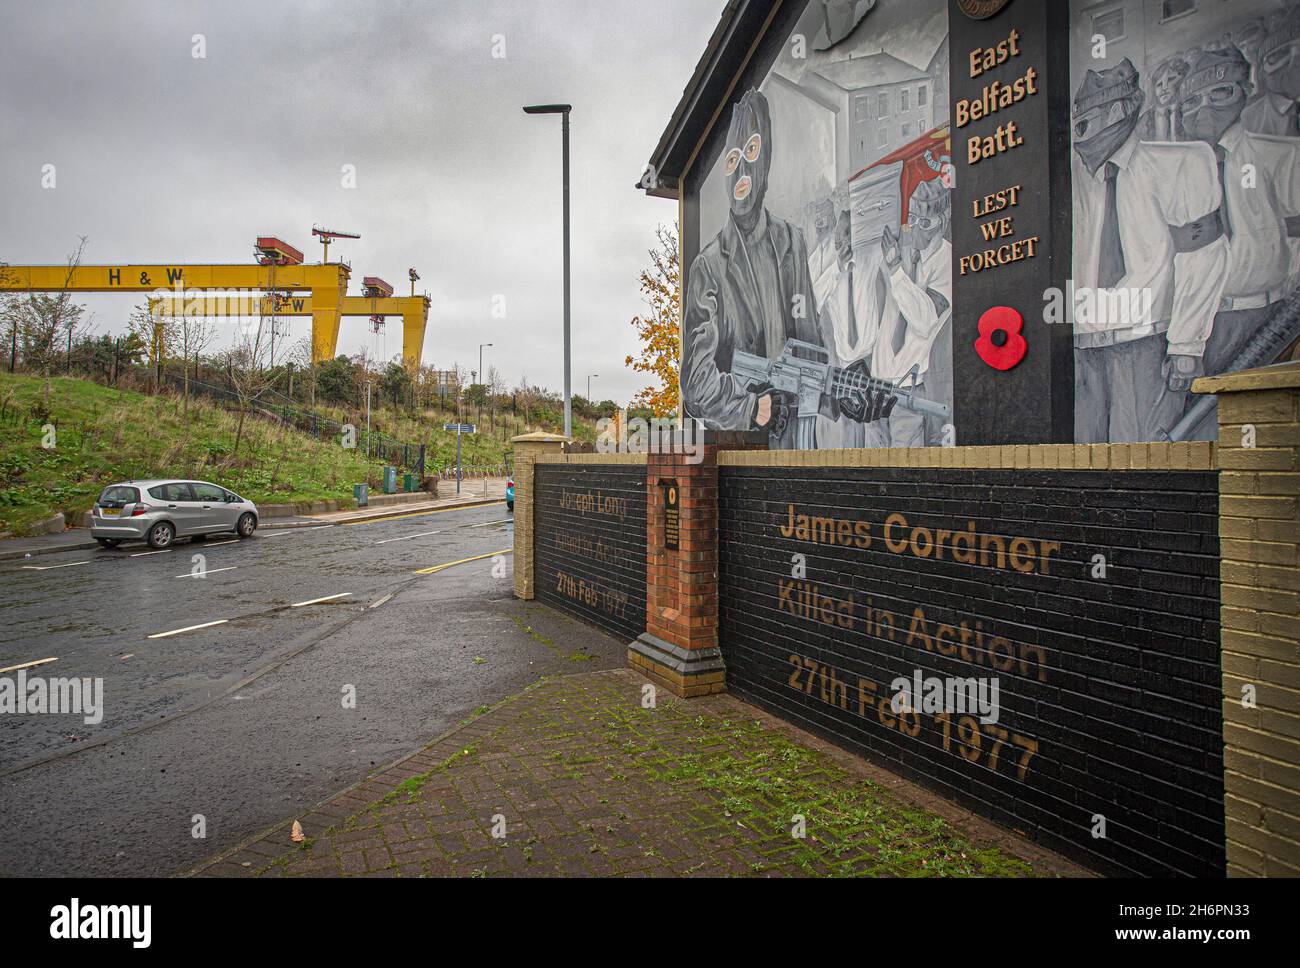 Ulster Volunteer Force (UVF) loyalist mural with Harland & Wolff shipyard in background, East Belfast ,Northern Irland . Stock Photo